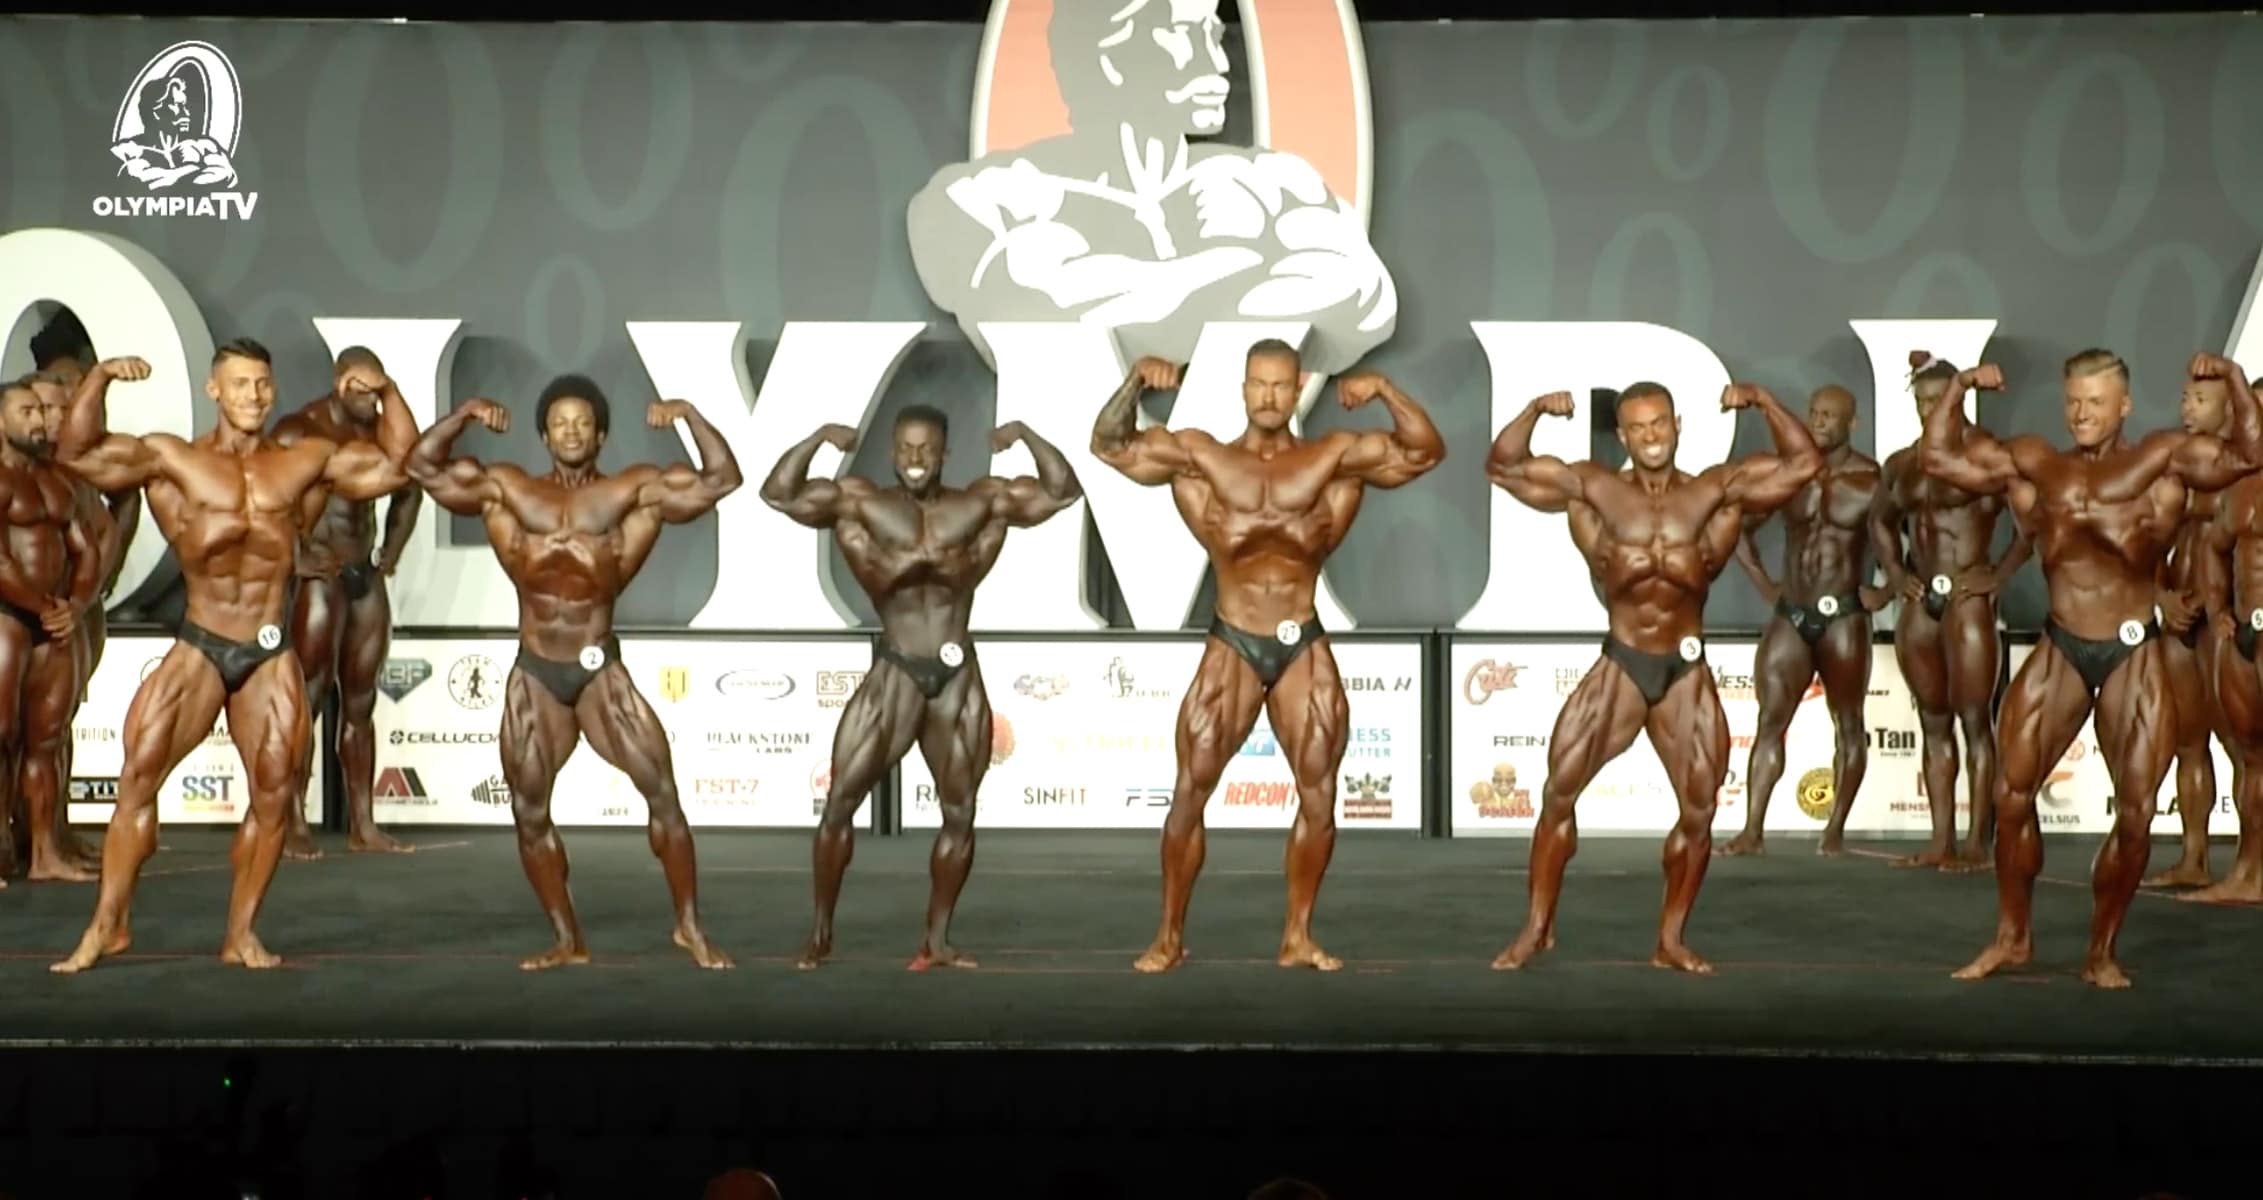 Classic-Physique-5th-Callout.jpg